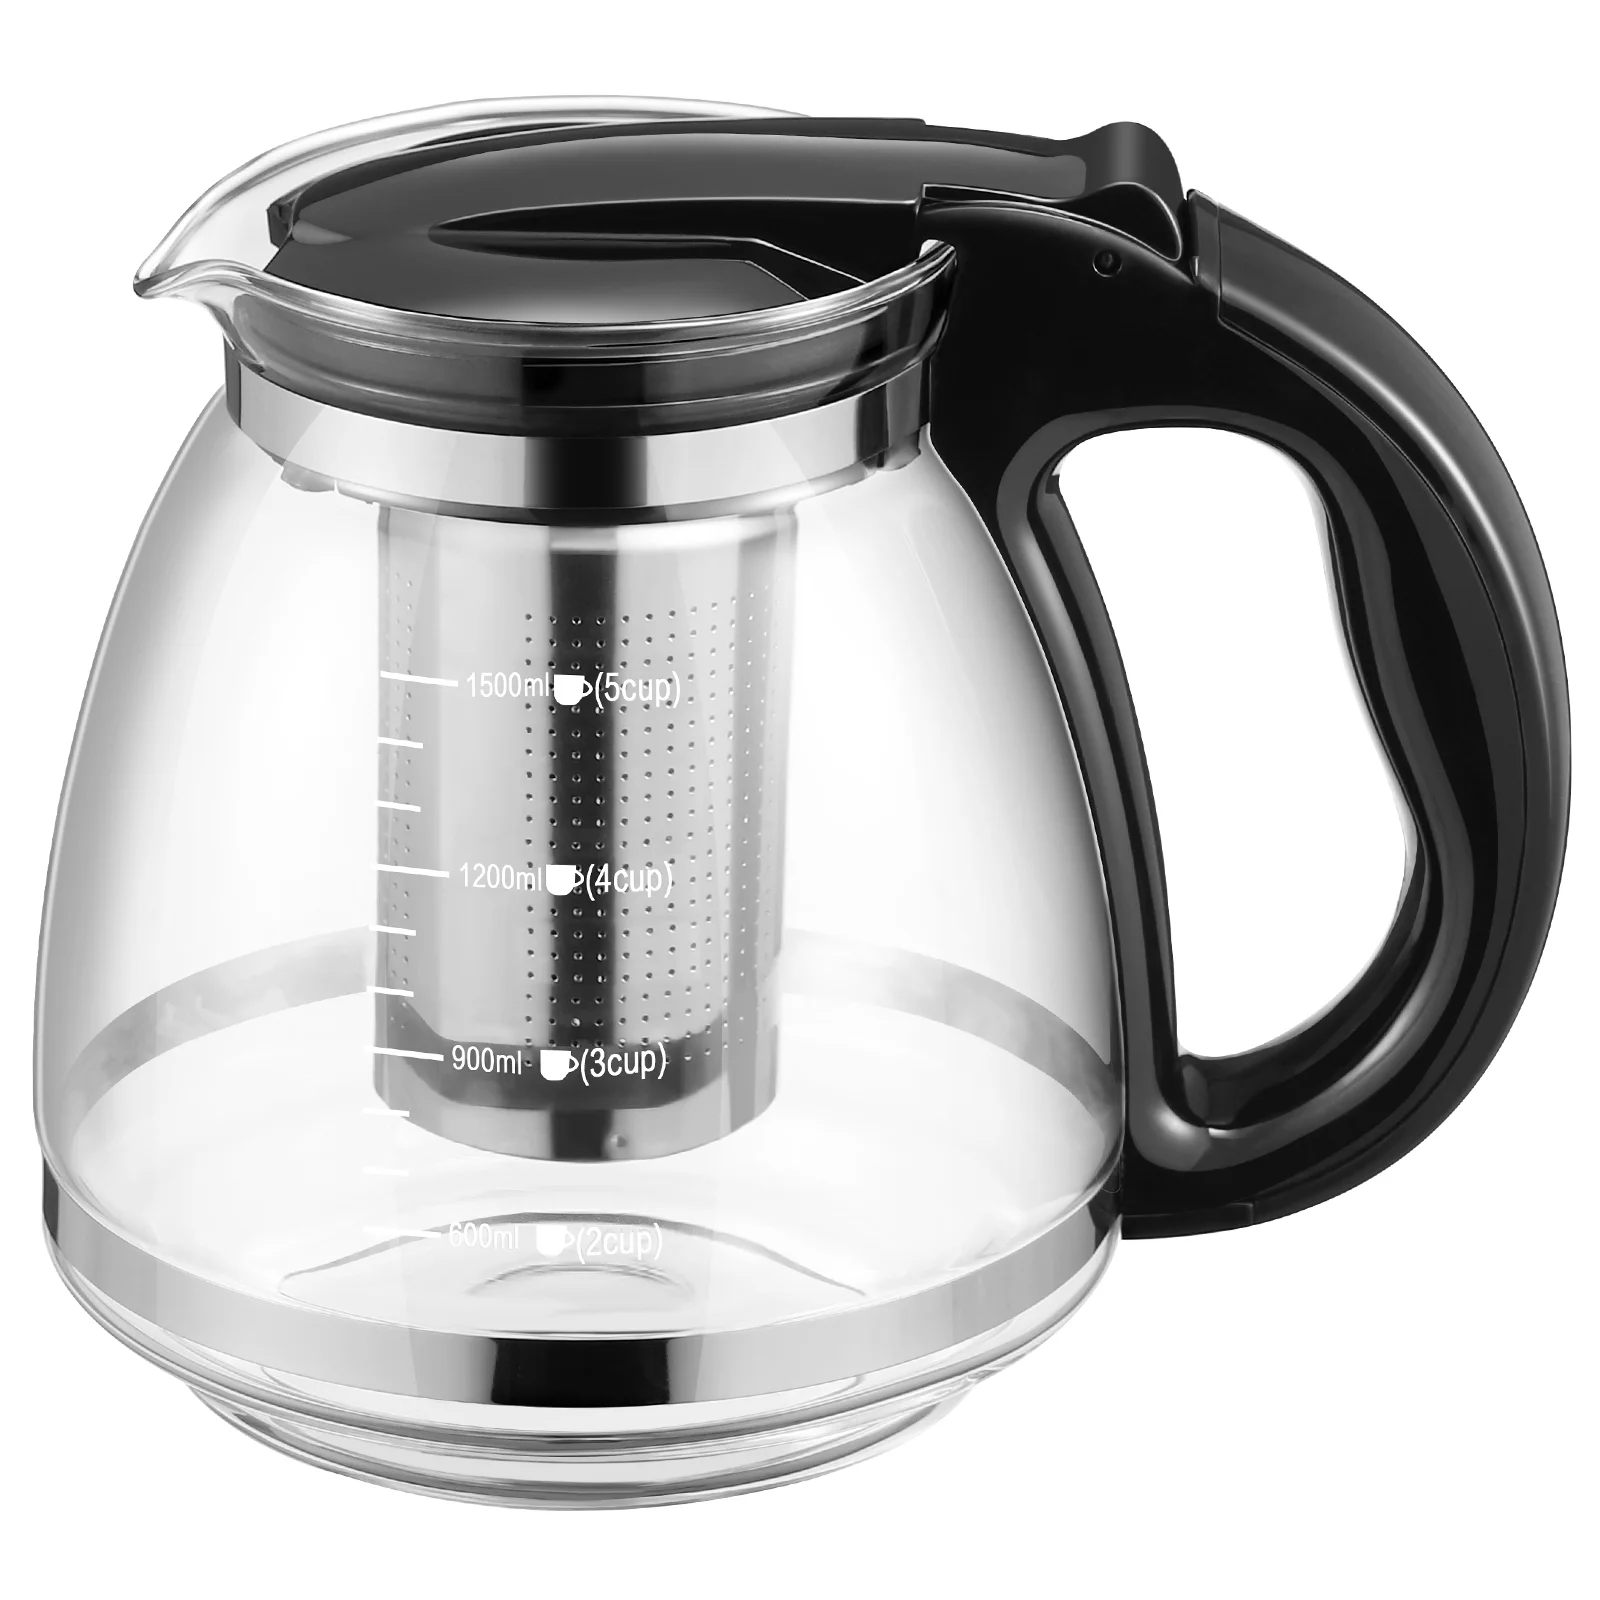 

Clear Tea Kettle Glass Teapot Removable Infuser Stovetop Safe Small Kungfu Teaware Maker Coffee and tableware